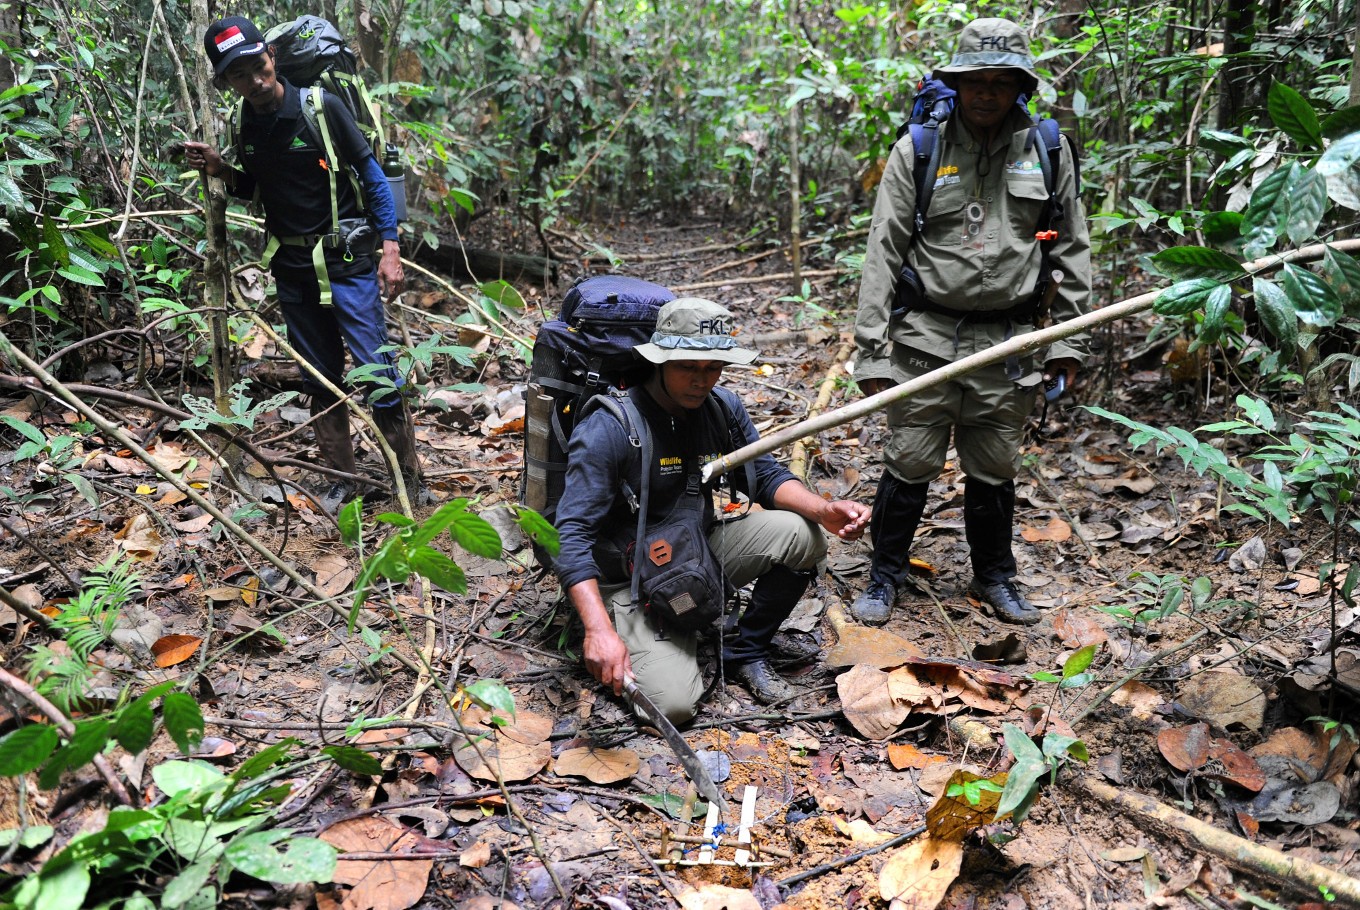 Indonesian forest rangers discovering traps set up by poachers to capture bears and tigers in the Leuser ecosystem rainforest, located mostly within the province of Aceh on the northern tip of the island of Sumatra. Image: AFP/Chaideer Mahyuddin